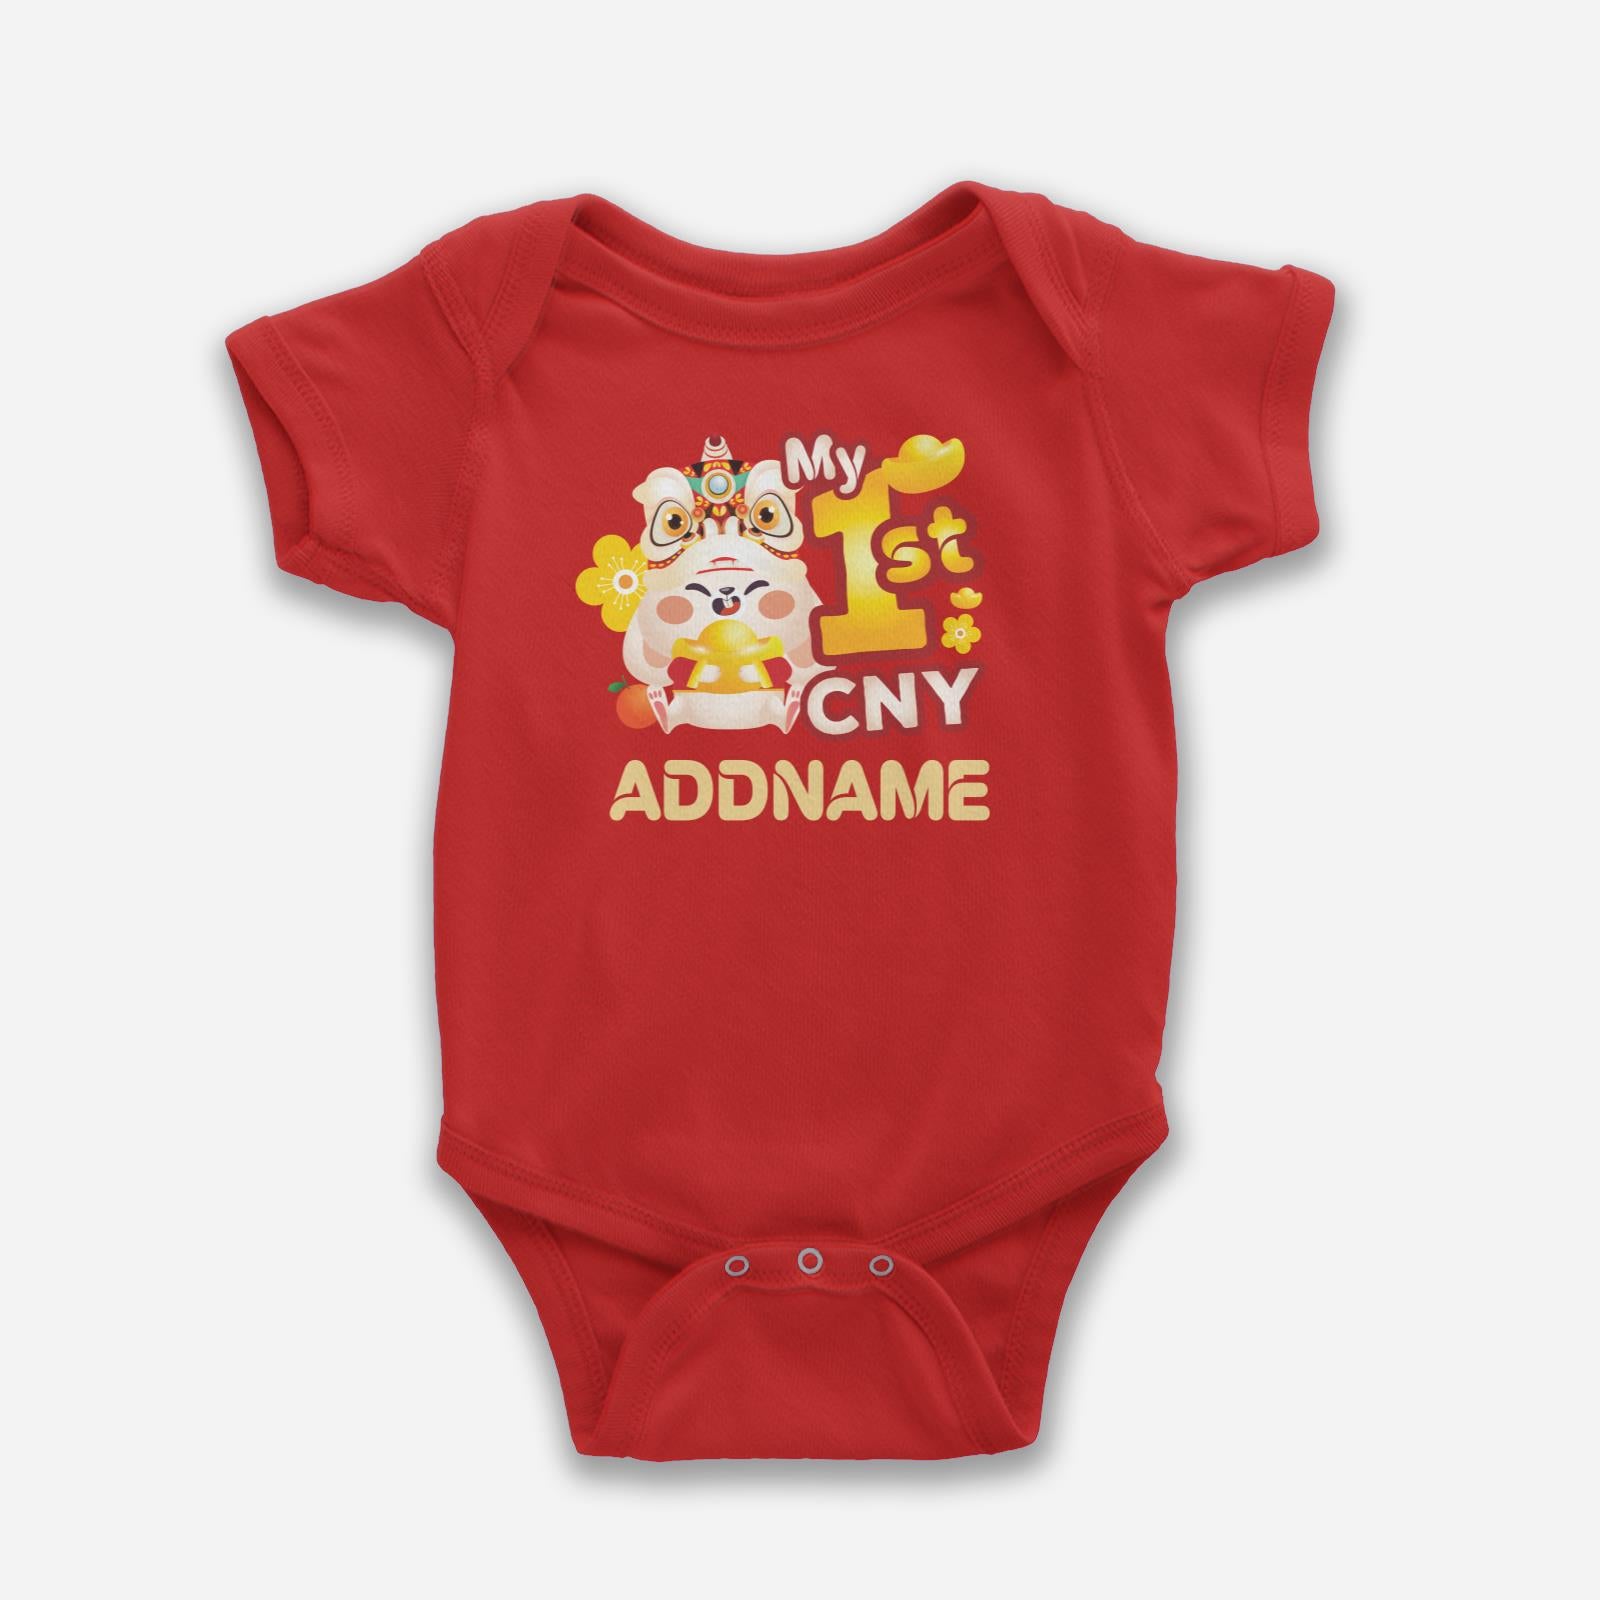 Cny Rabbit Family - My First Cny Baby Romper With English Personalization